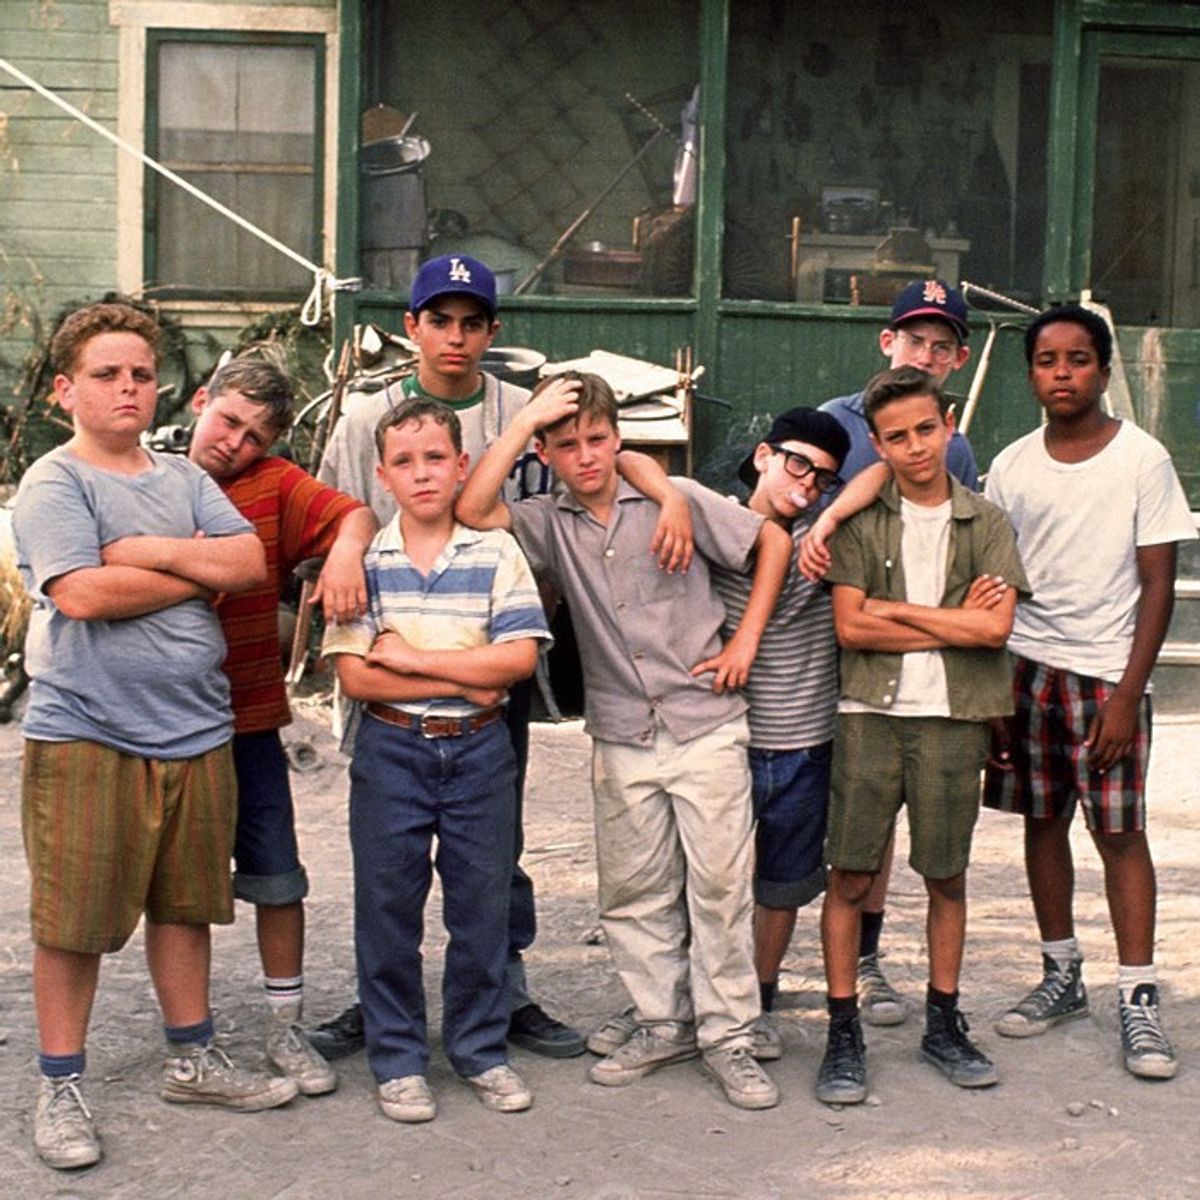 10 Times "The Sandlot" Described College